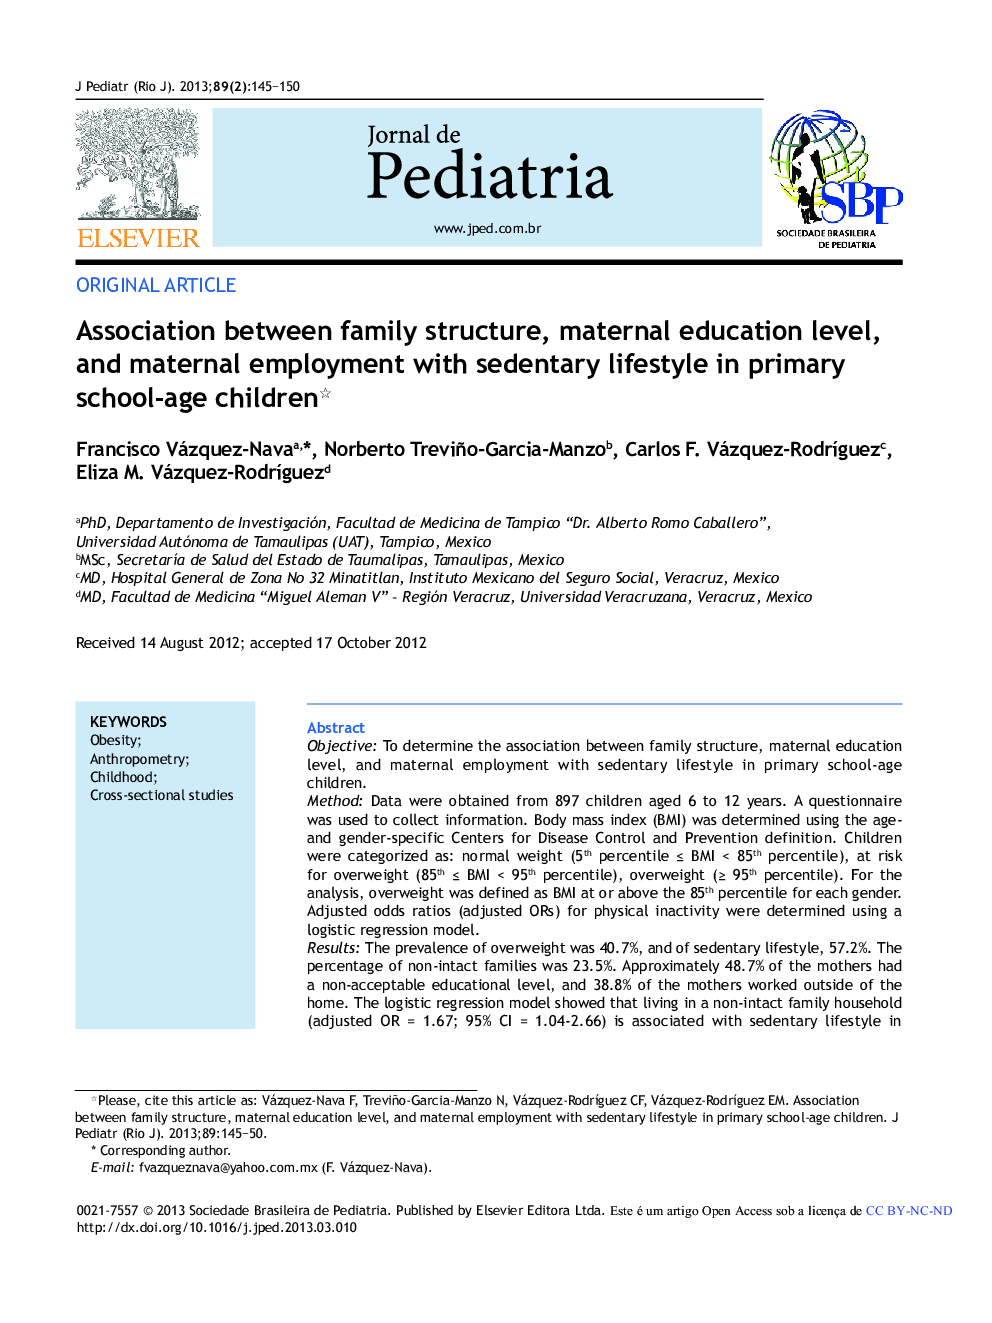 Association between family structure, maternal education level, and maternal employment with sedentary lifestyle in primary school-age children *